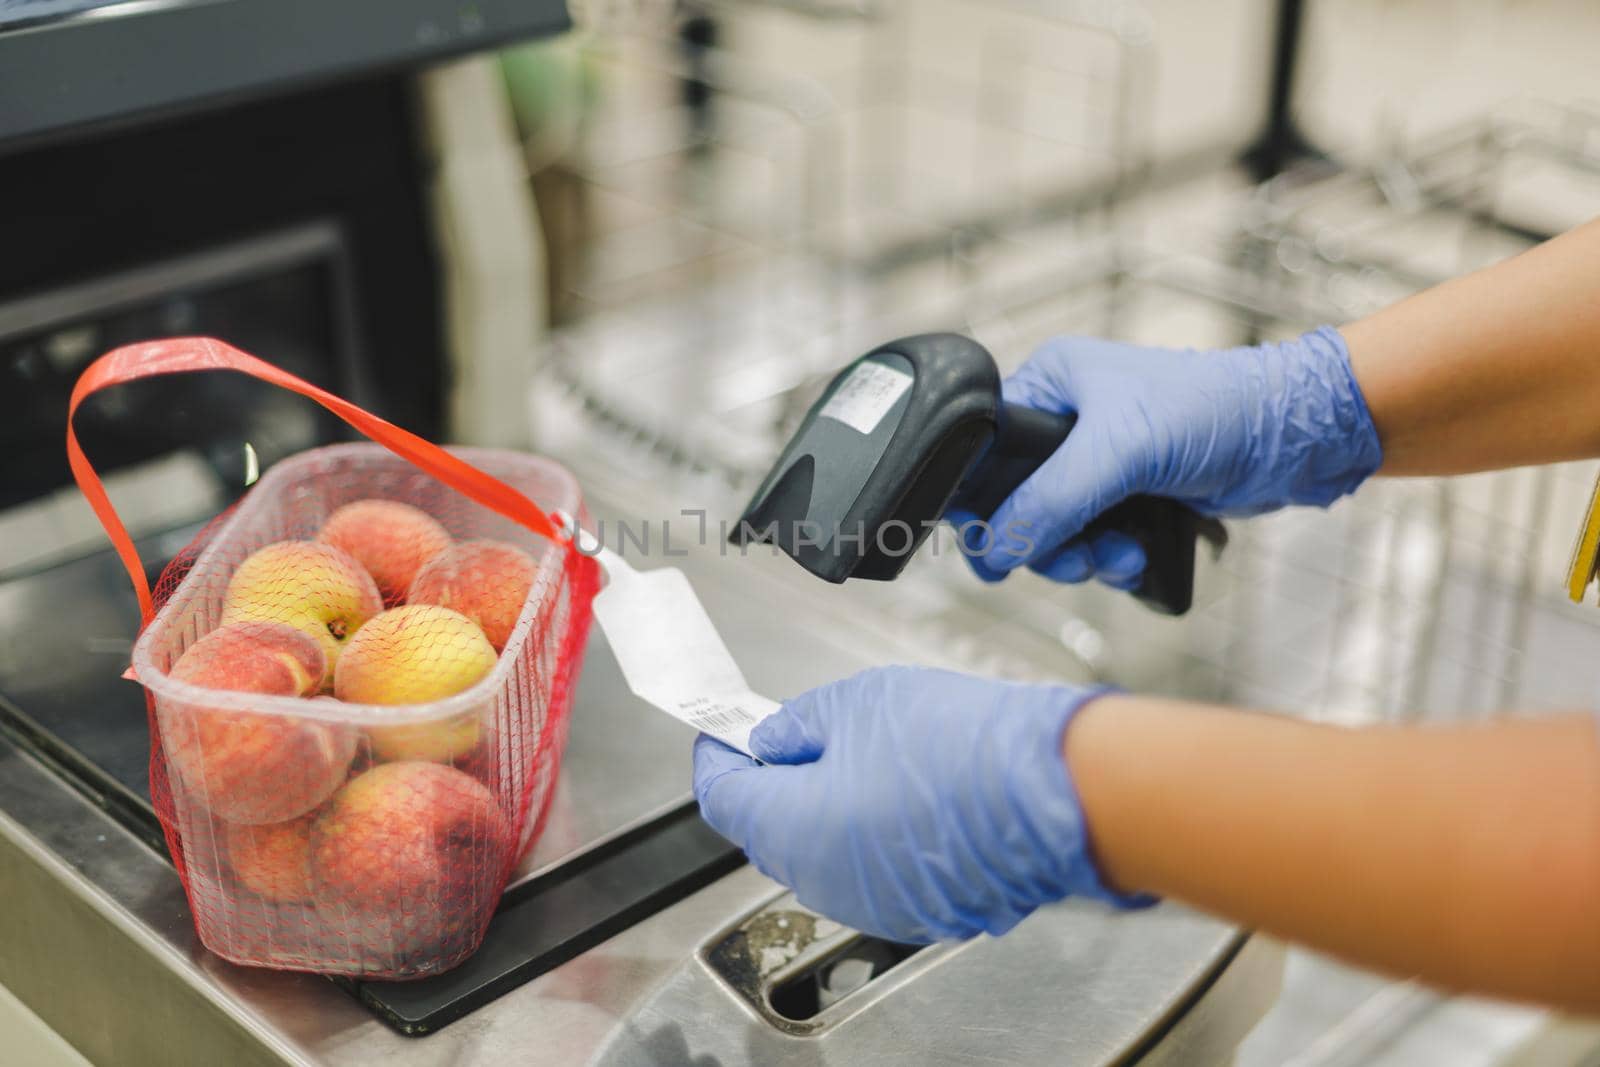 Scanning bar code. Woman or worker in blue medical gloves holding bar code scanner and scanning  paper on peach fruit. Shopping during the corona virus pandemic, selective focus by Slast20